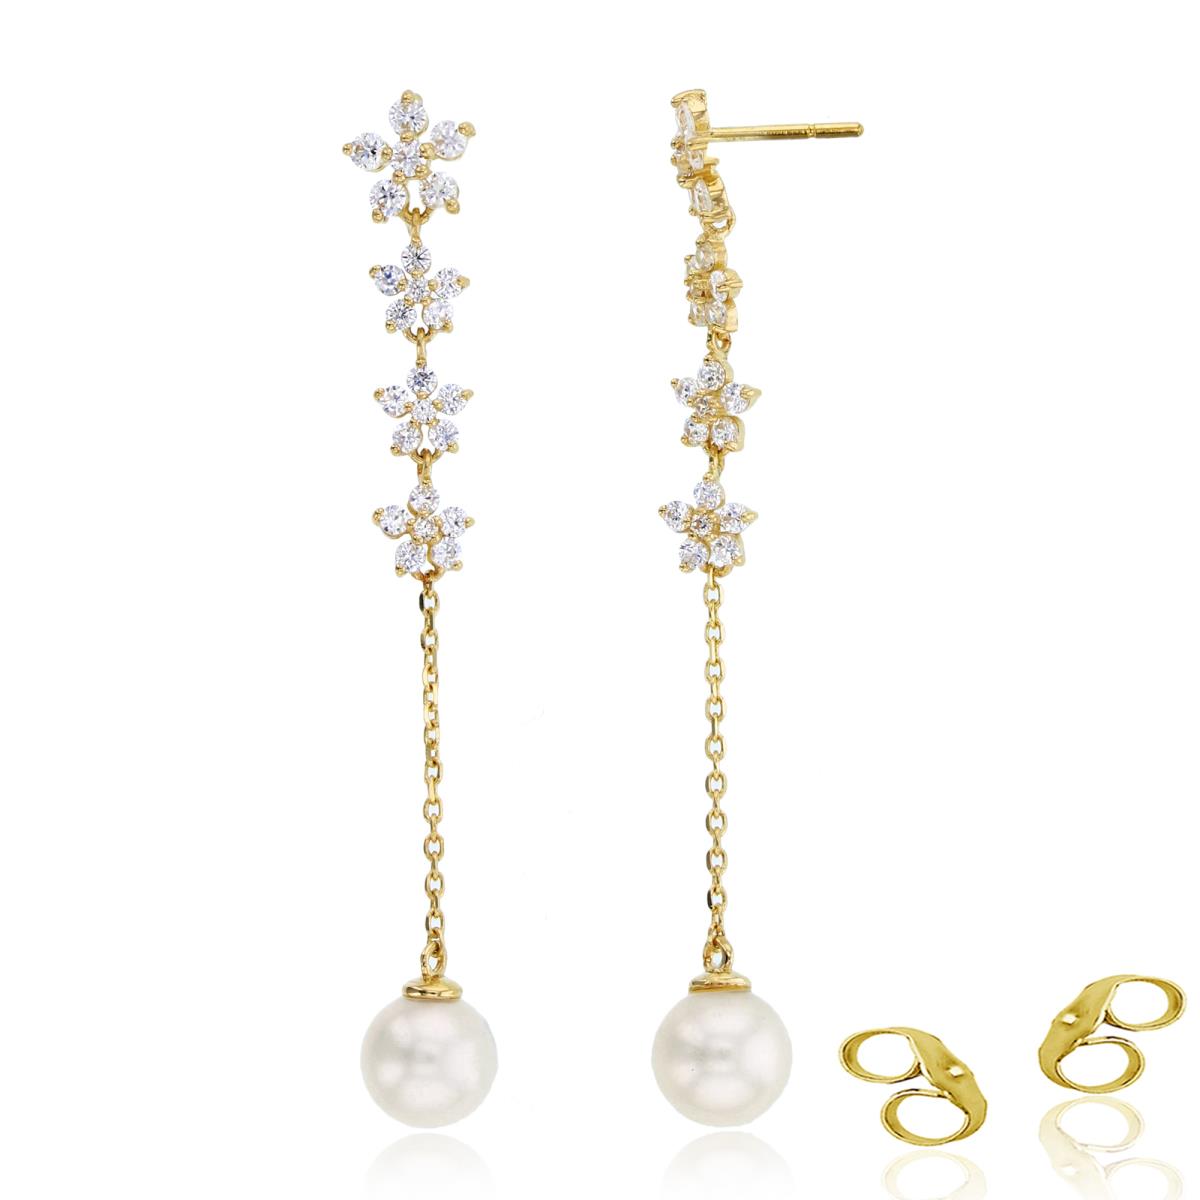 14K Yellow Gold Rnd Cr. White Sapphire Graduated Flowers & 5mm Rnd FWP Dangling on Chain Earrings with 4.5mm Clutch